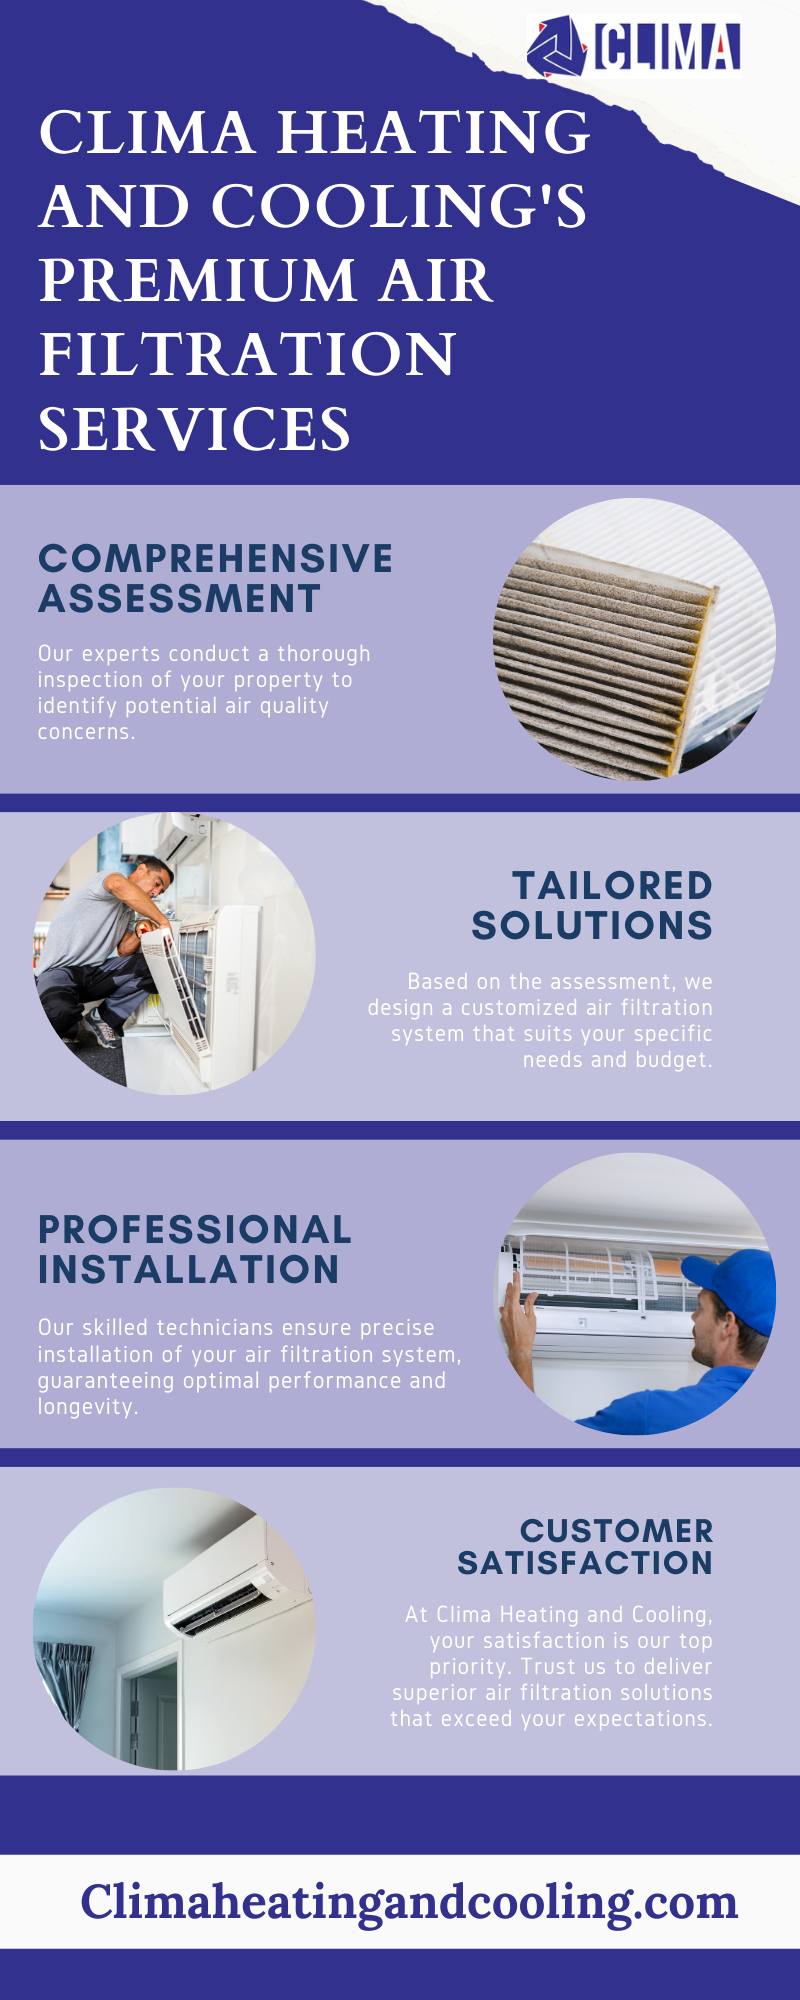 Clima Heating and Cooling's Premium Air Filtration Services